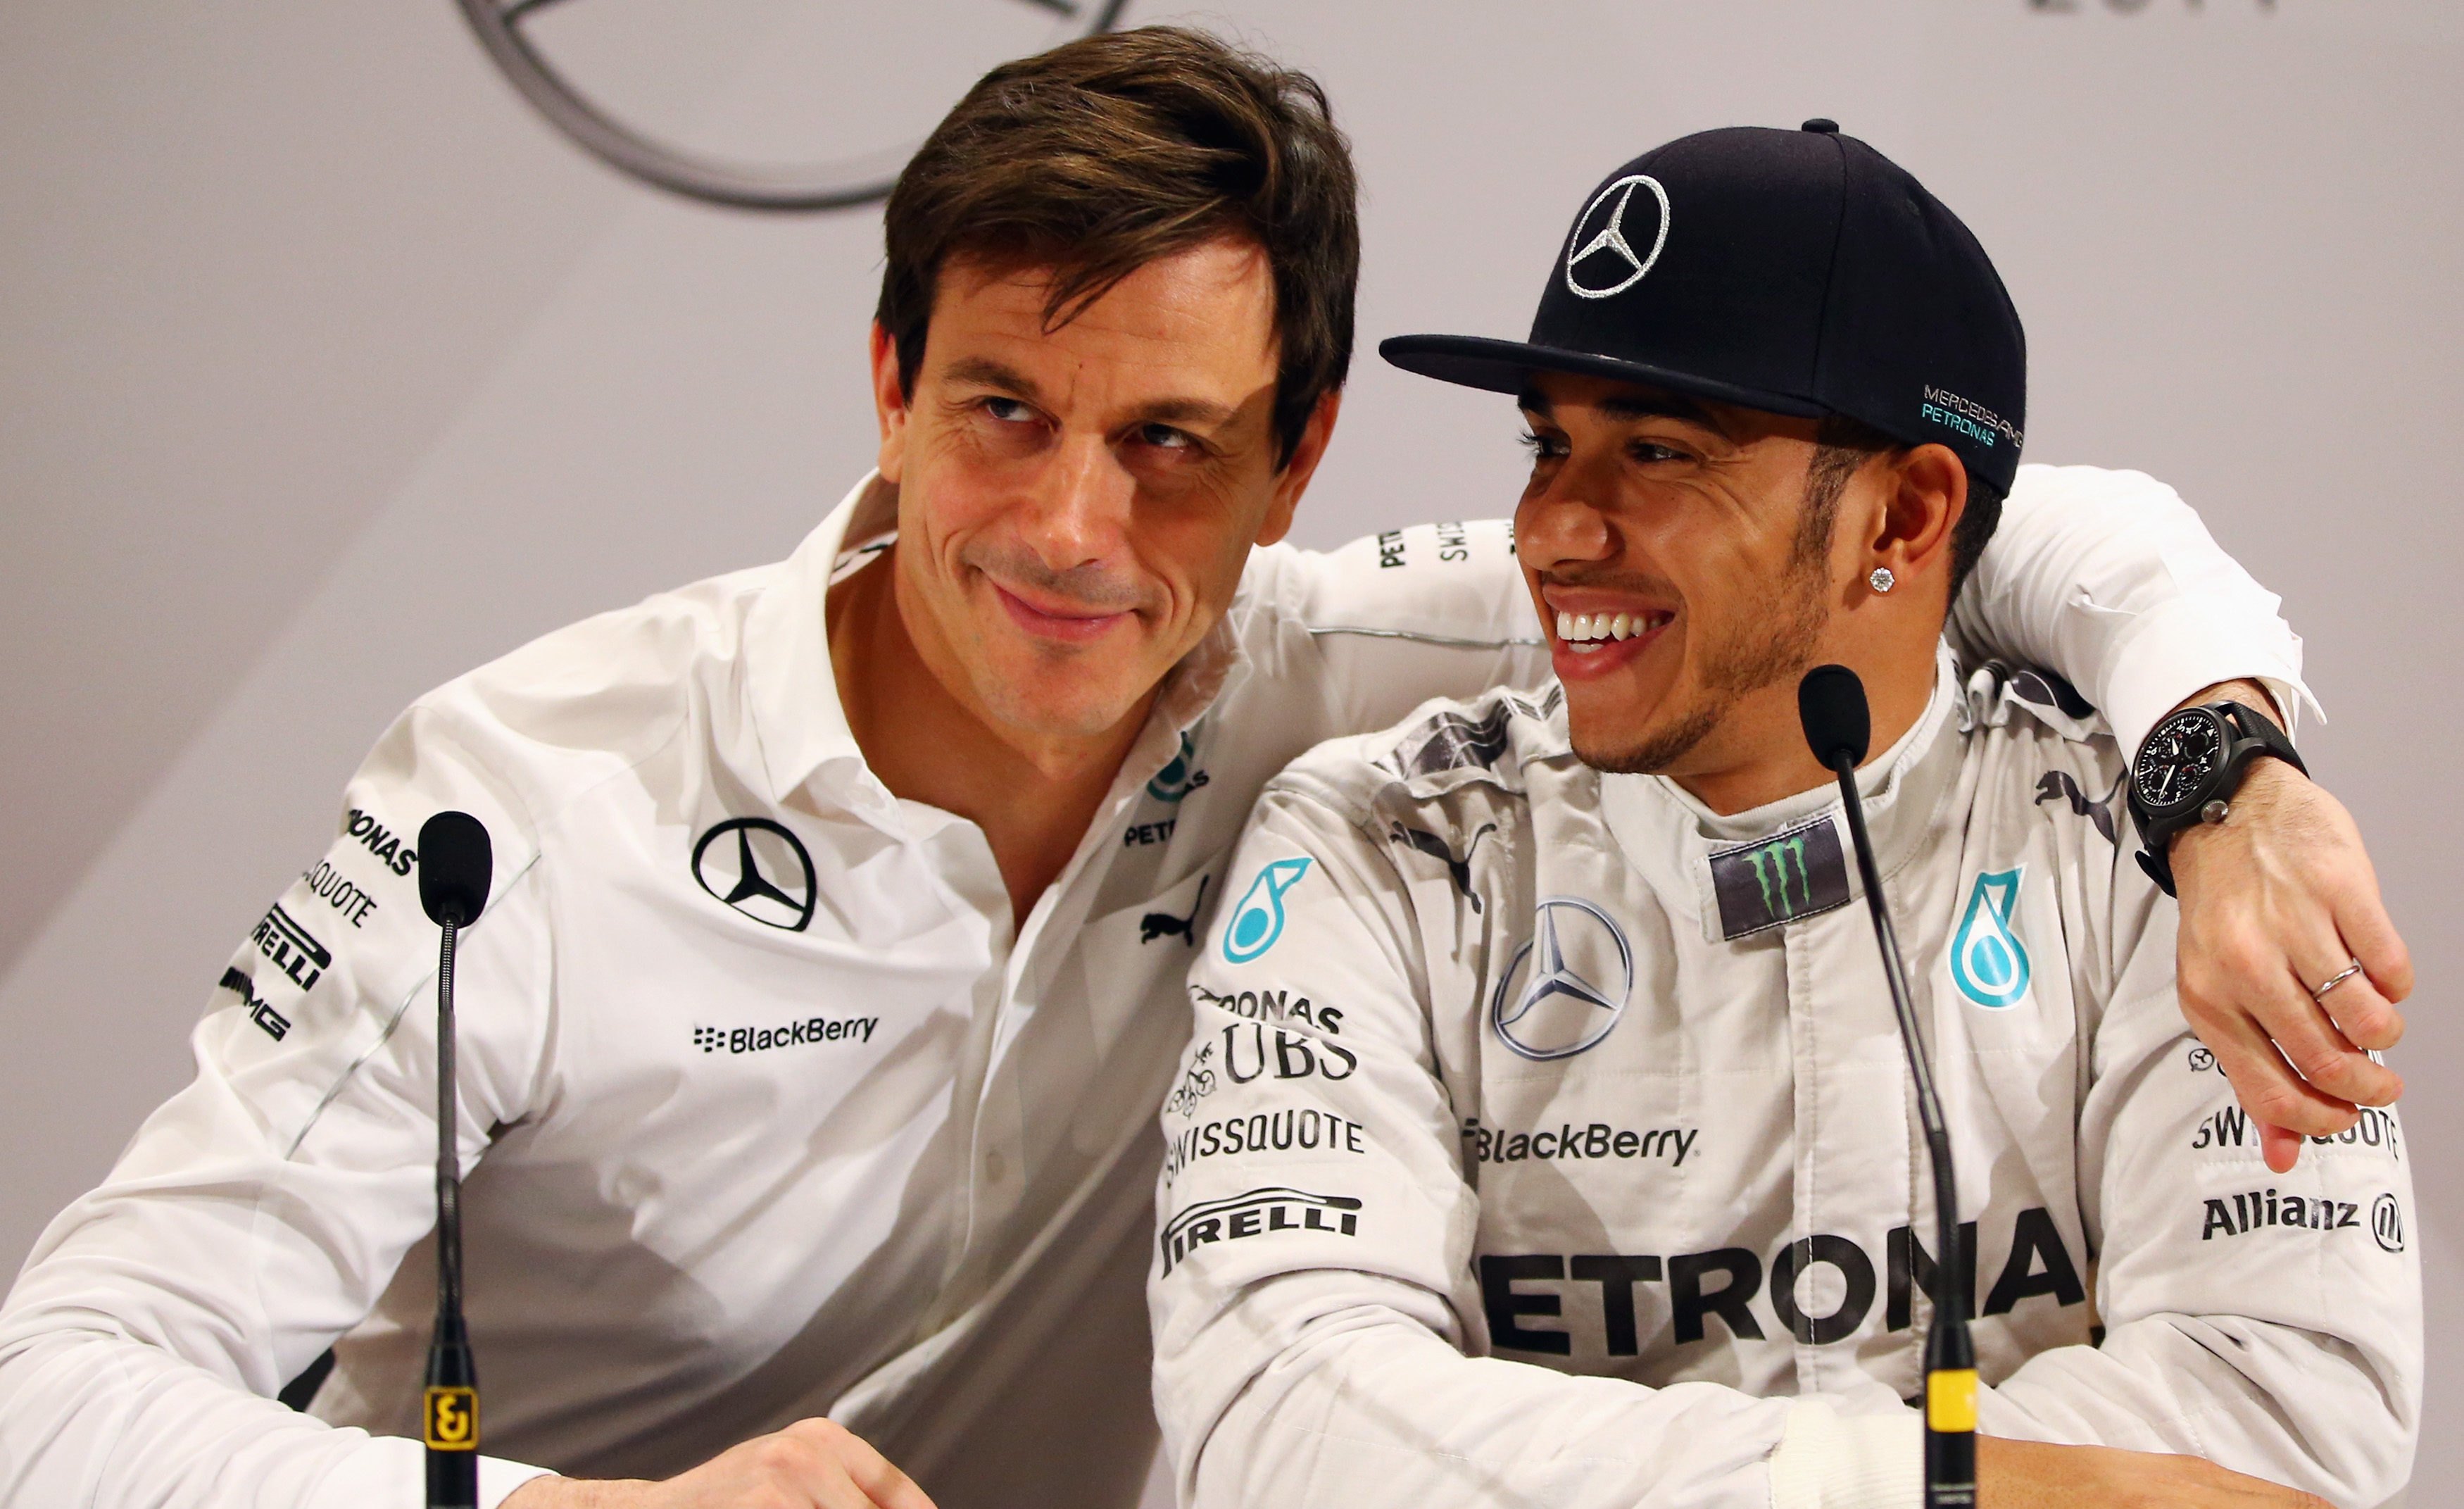 Mercedes F1 racing driver Lewis Hamilton and team CEO Toto Wolff speaking at a press conference